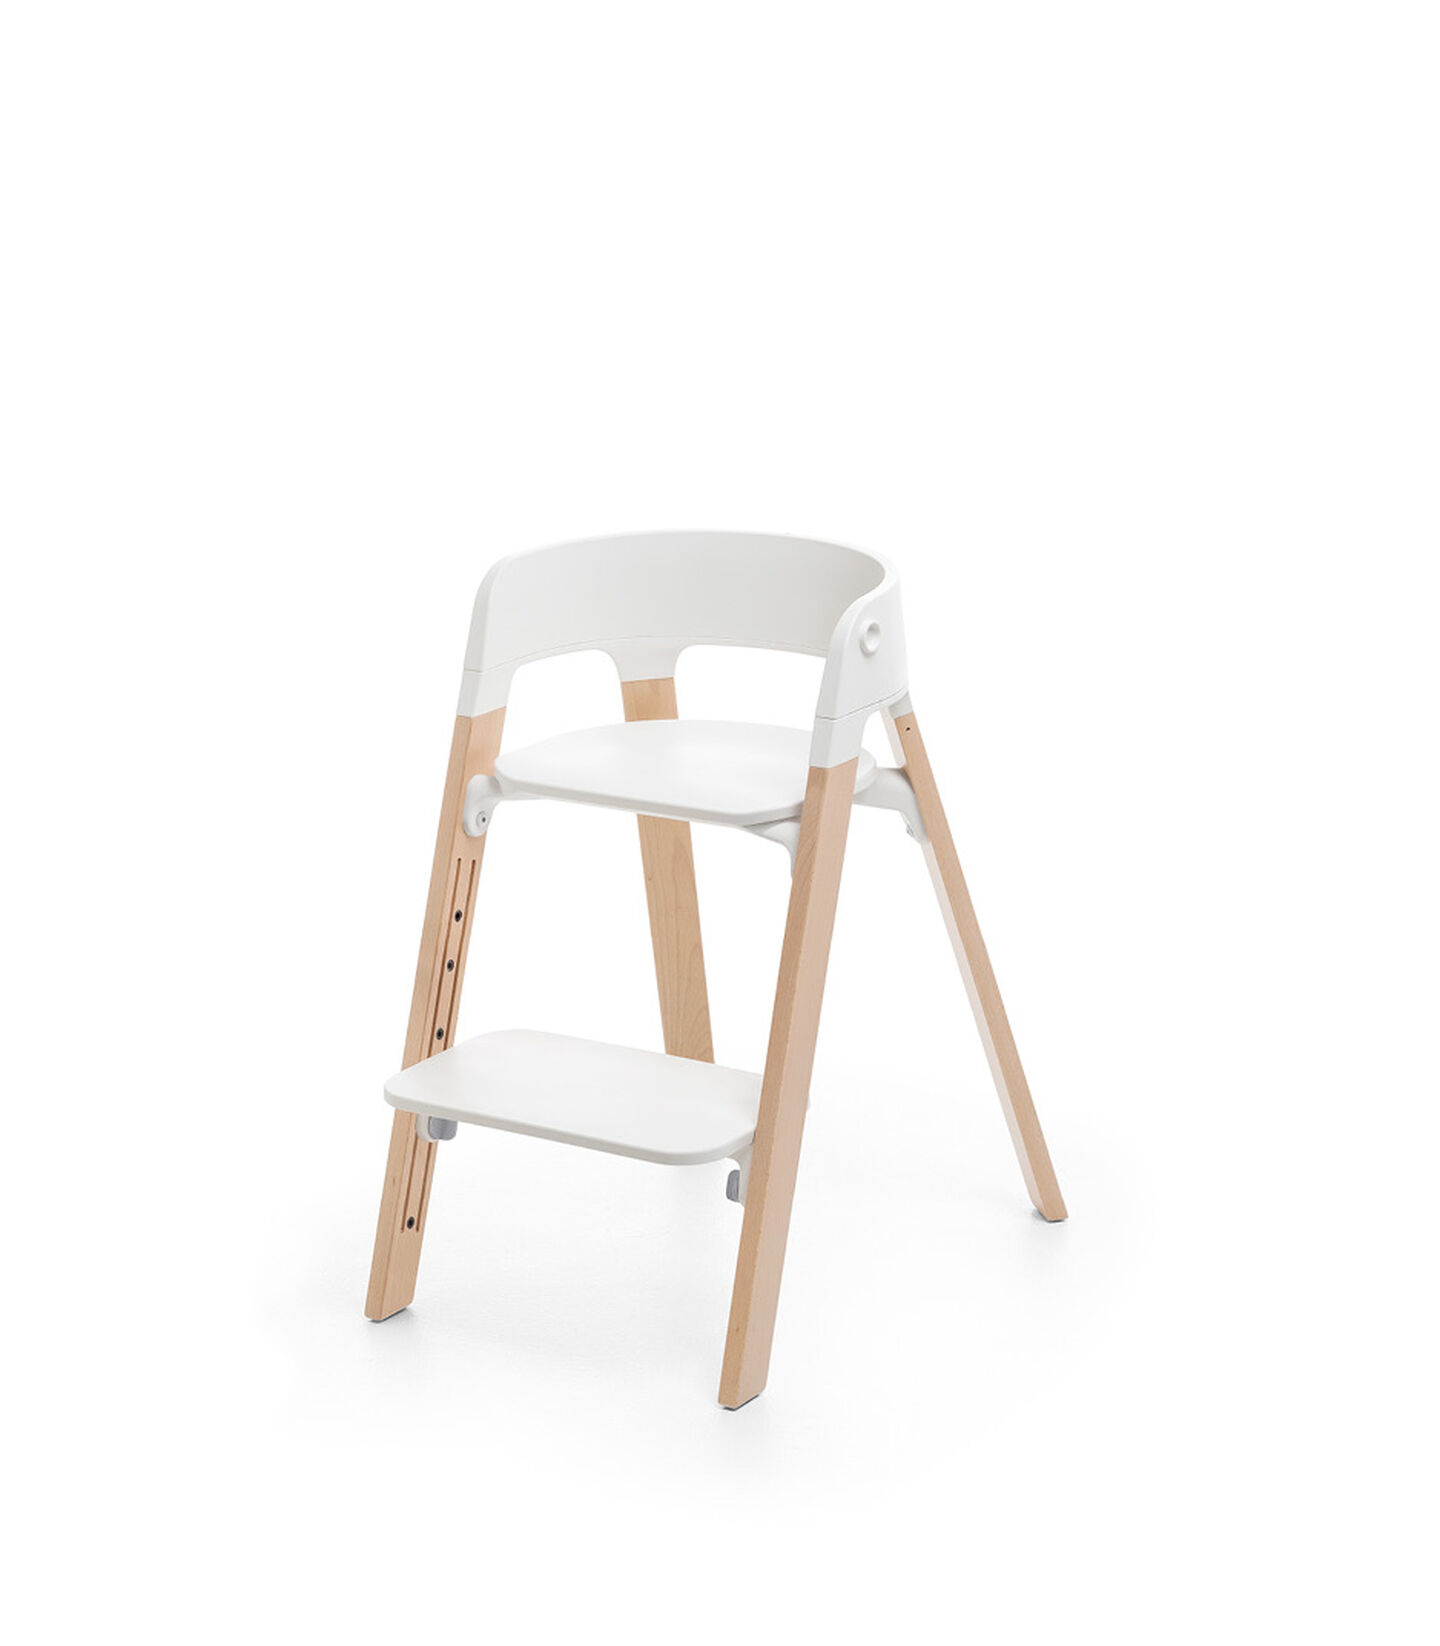 Stokke® Steps™ Chair, Beech Natural with White Seat. Footrest low. view 1